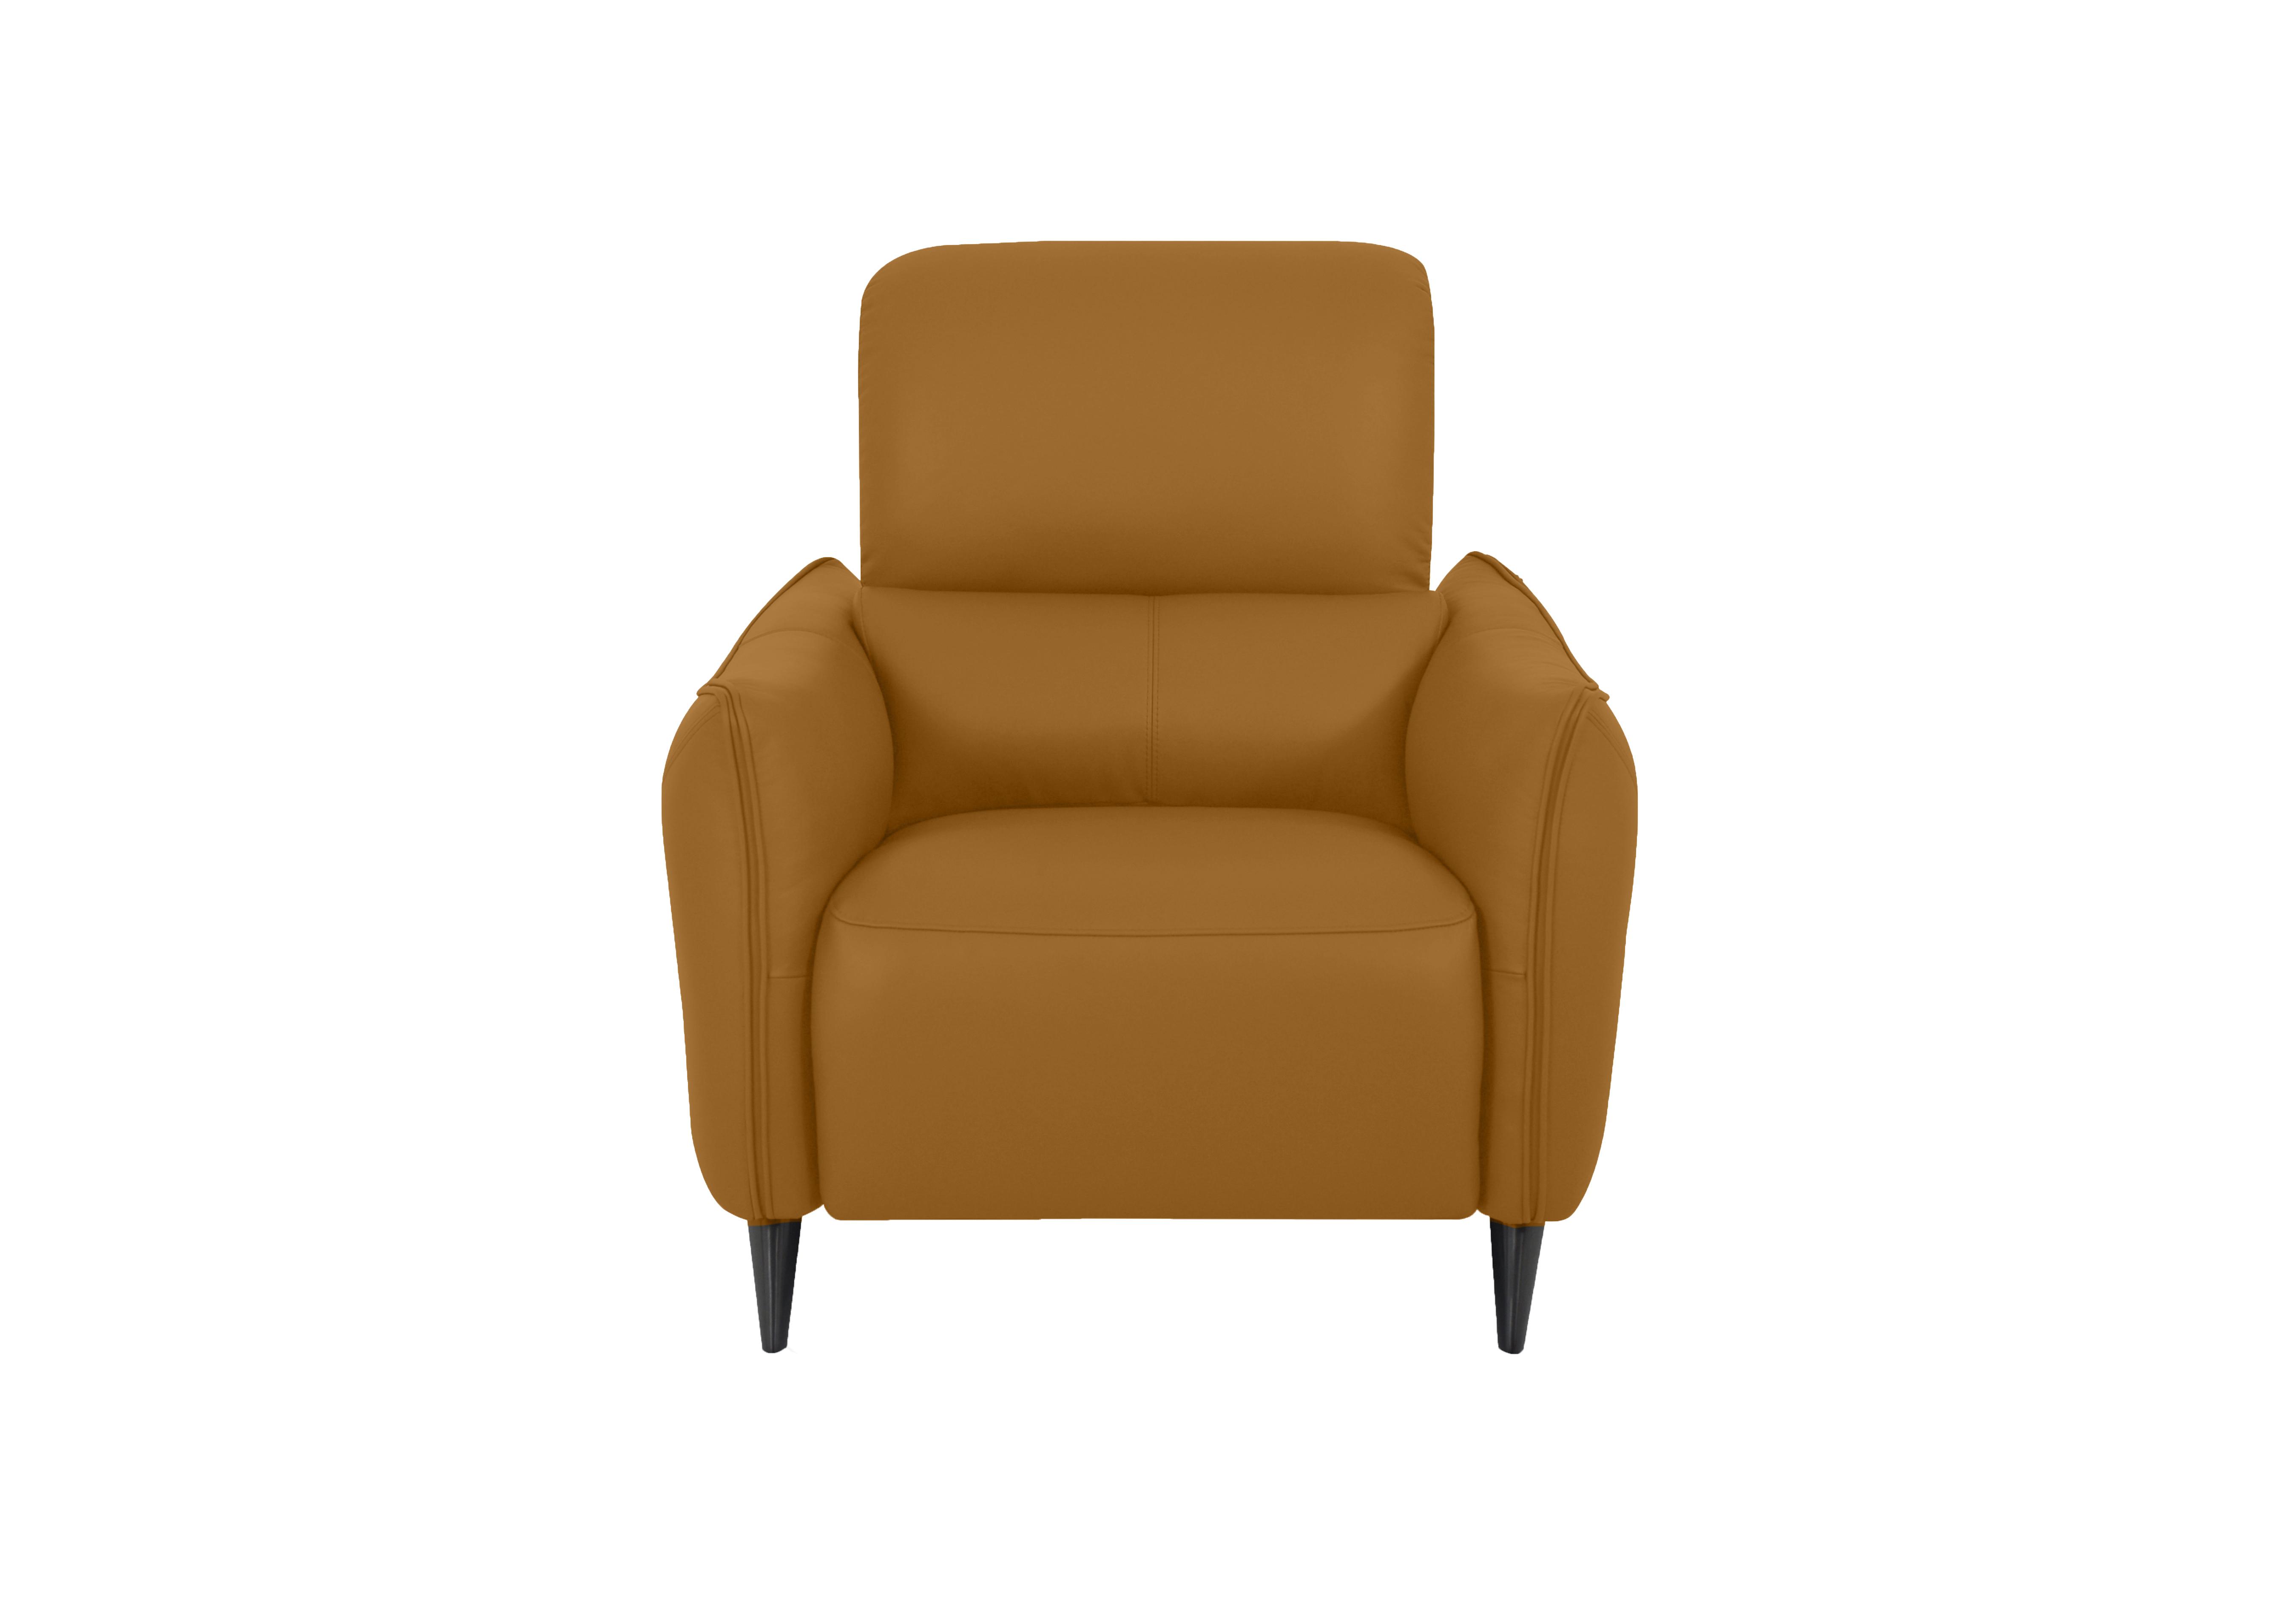 Maddox Leather Chair in Np-606e Honey Yellow on Furniture Village